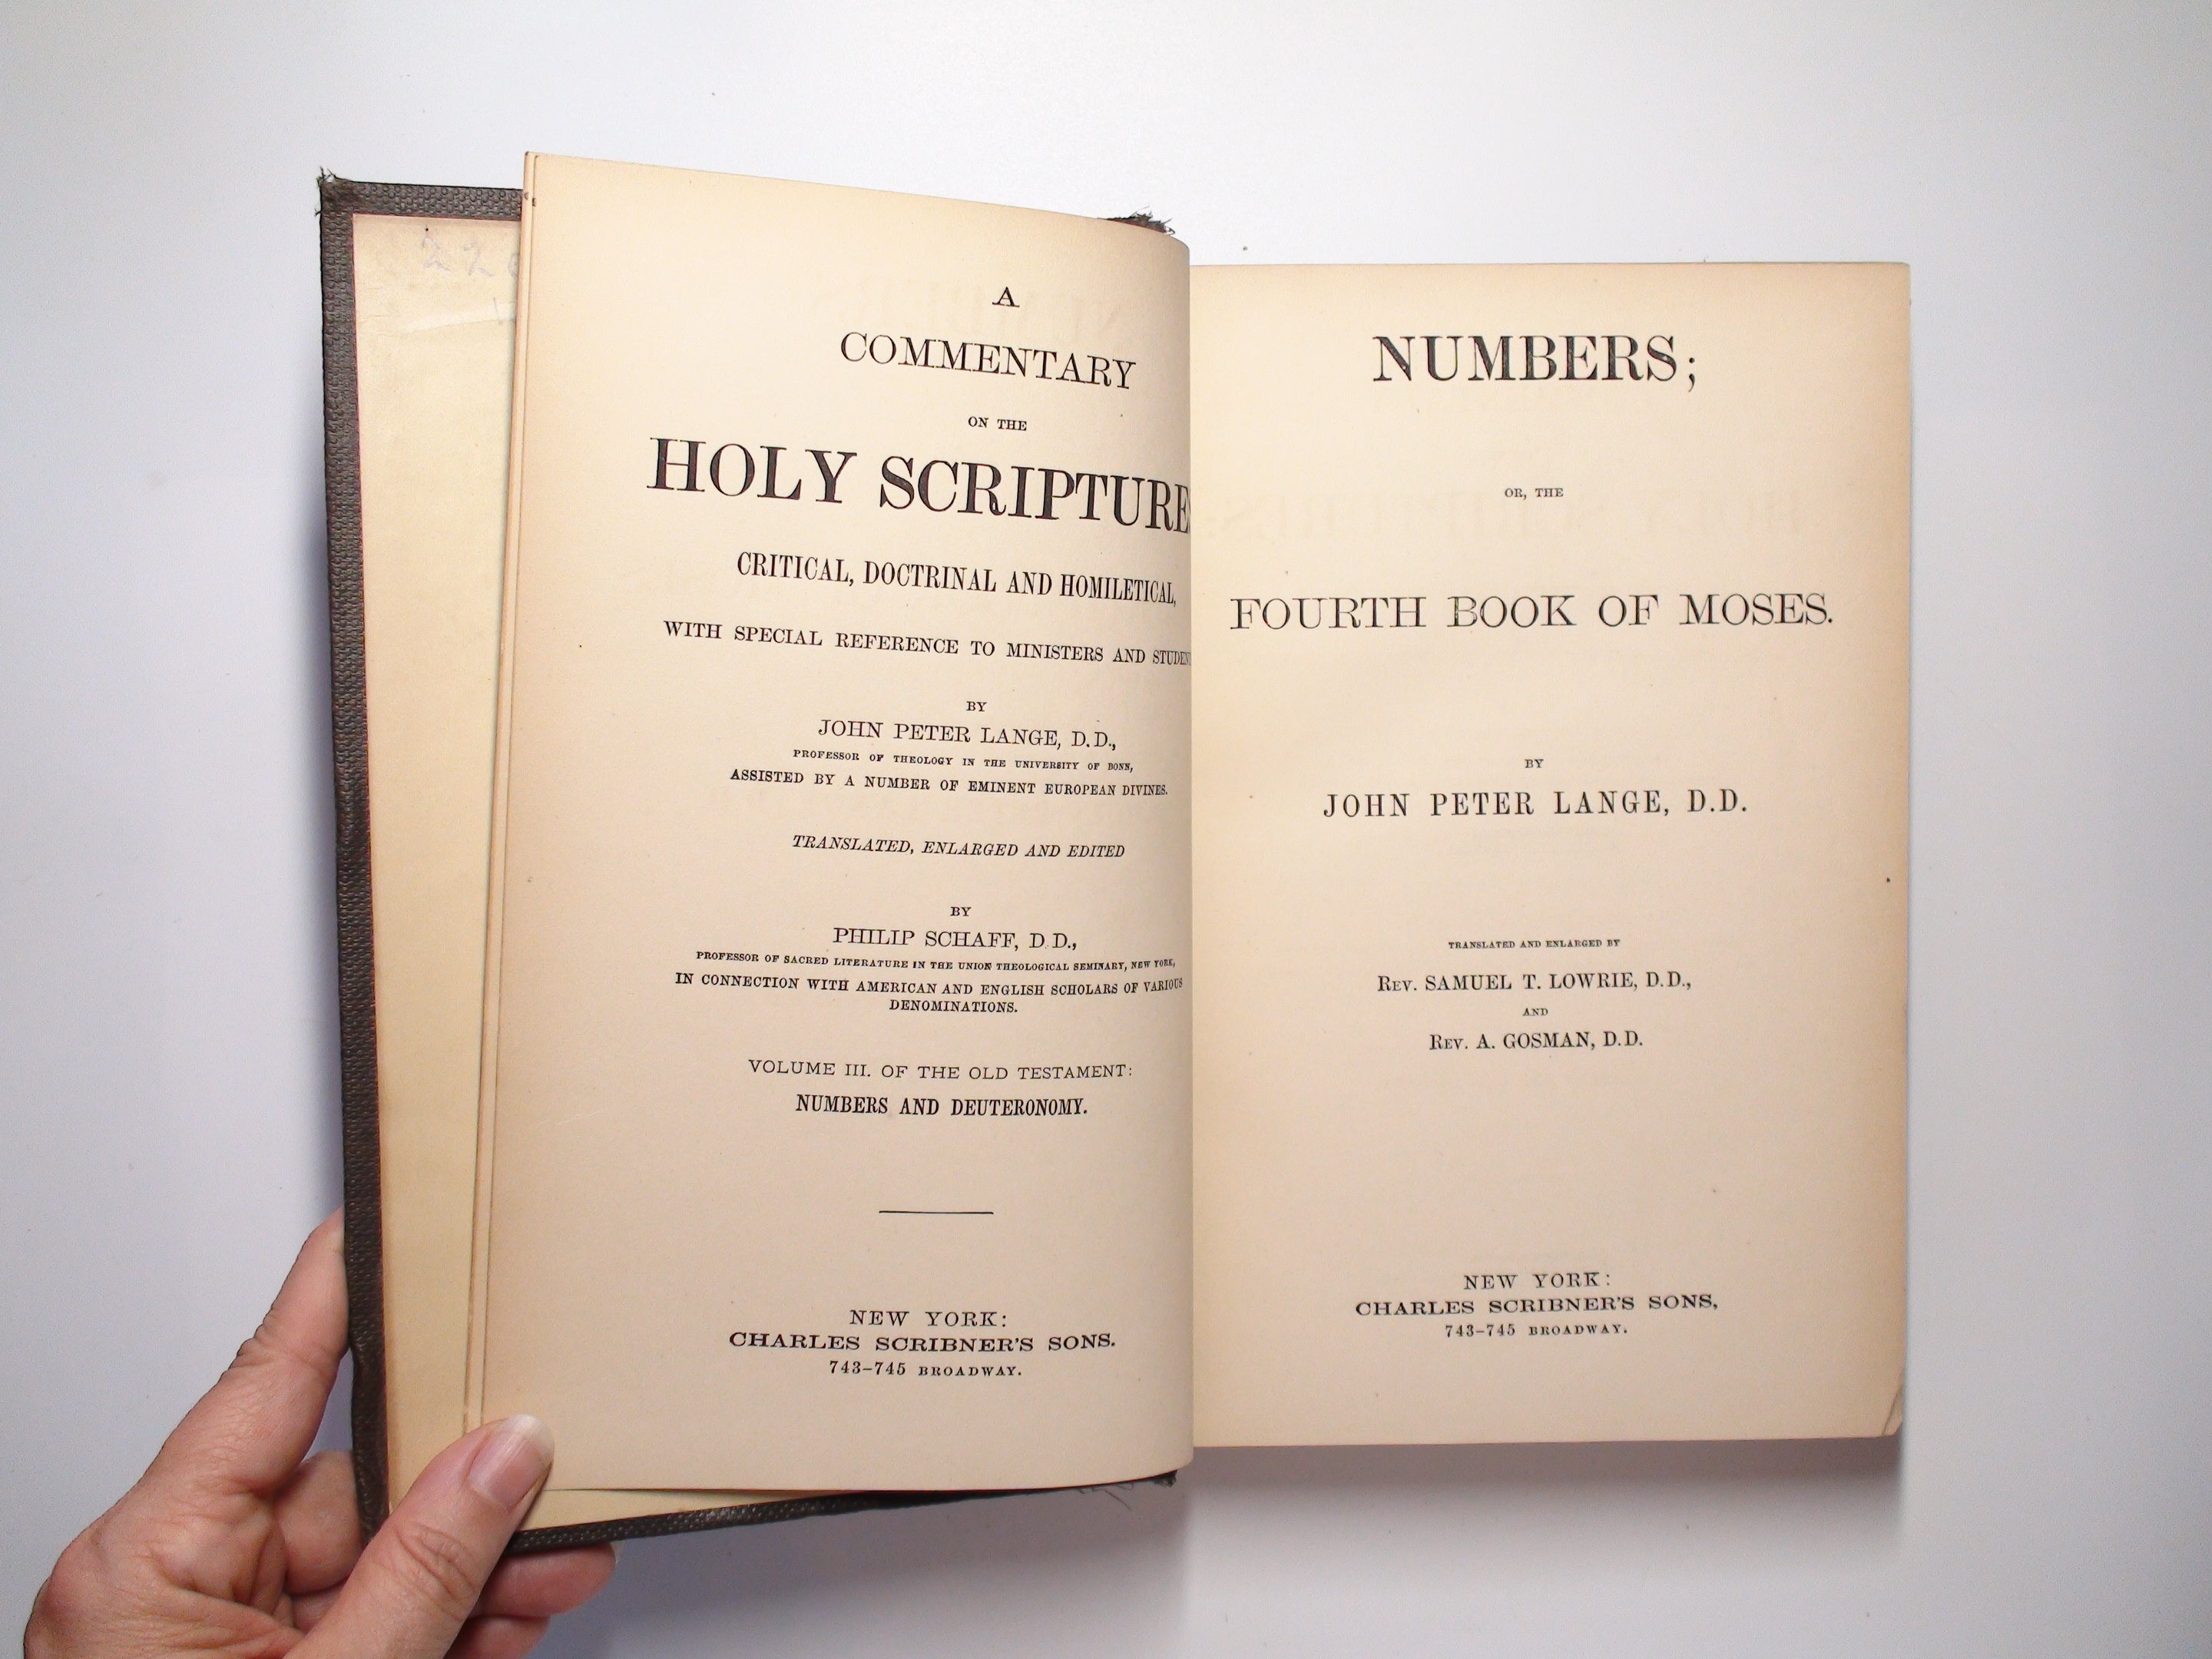 Numbers, Fourth Book of Moses, by John Peter Lange, Samuel T. Lowrie, 1879